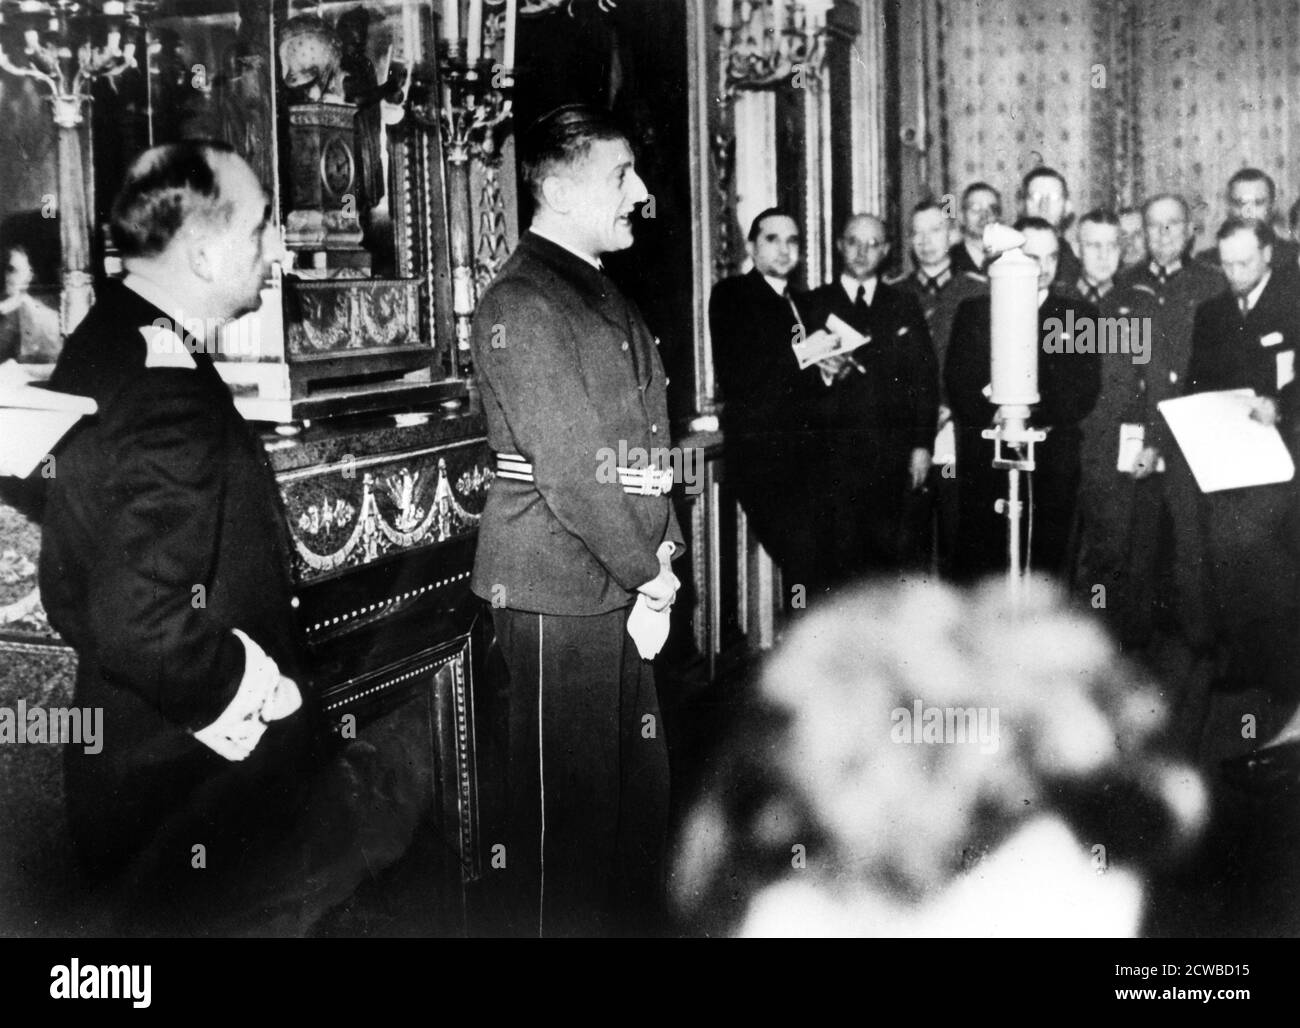 German Ambassador to Vichy France, Otto Abetz, delivering a press conference, 15 December 1940. The subject was the transfer of the body of the Emperor Napoleon II from Vienna to Paris, a gift from Hitler to the Vichy regime. On the left is Fernand de Brinon, a leading French collaborator during the Nazi occupation who was tried as a war criminal by the French after the liberation and executed in 1947. The photographer is unknown. Stock Photo